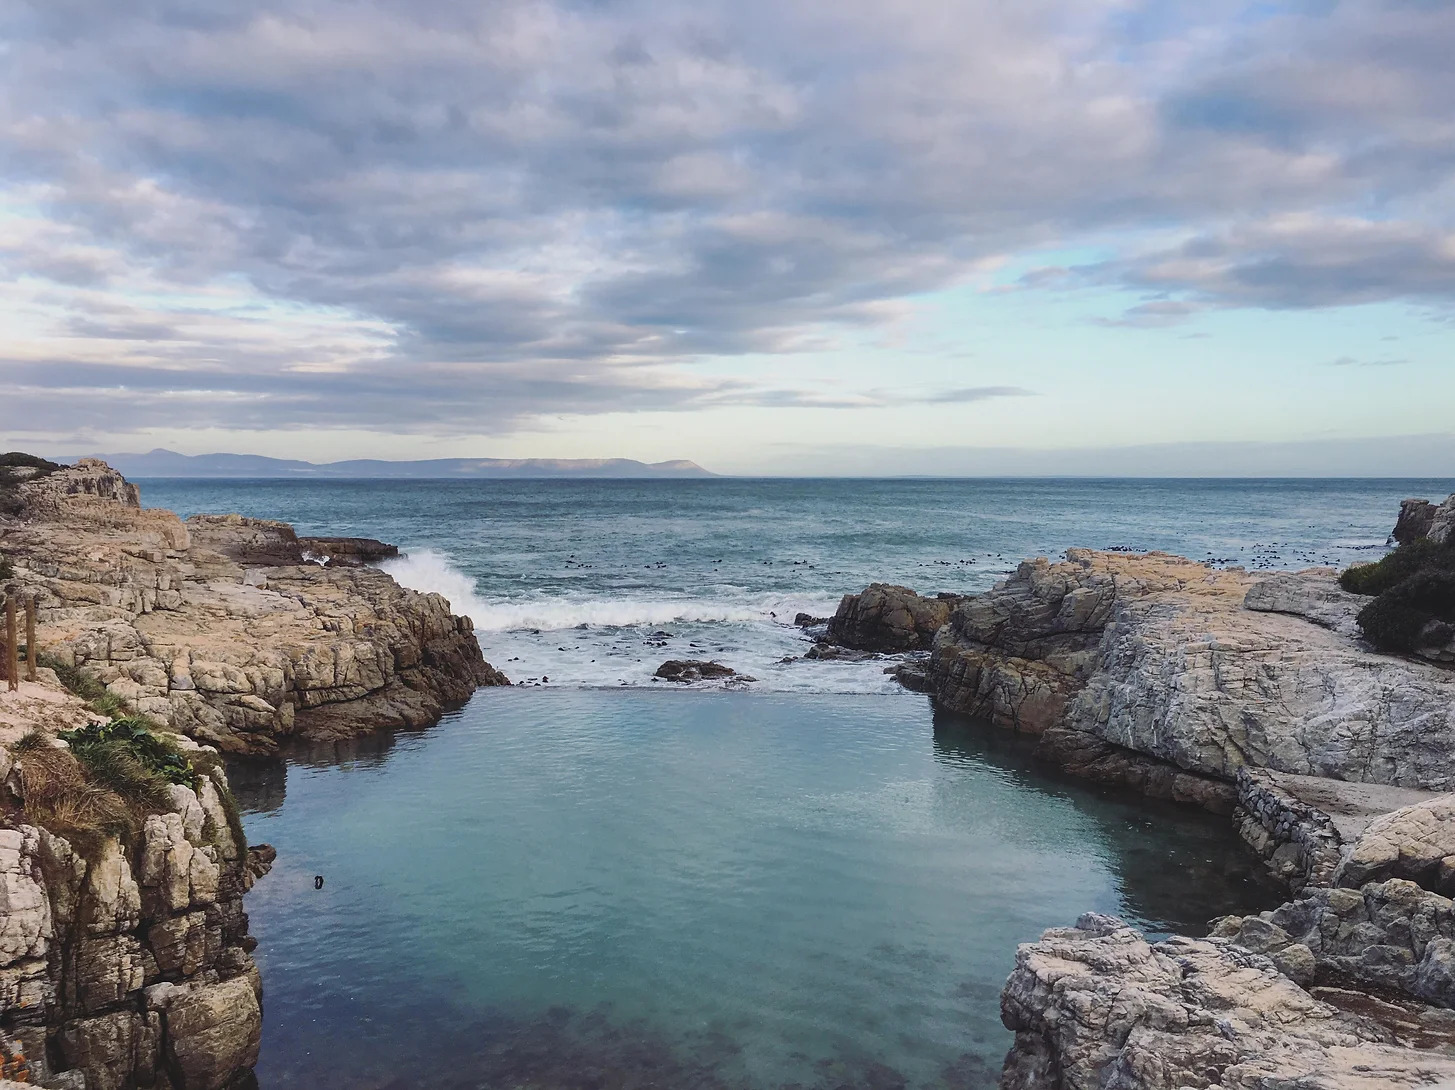 Where To Eat/Drink and What To Do In Hermanus